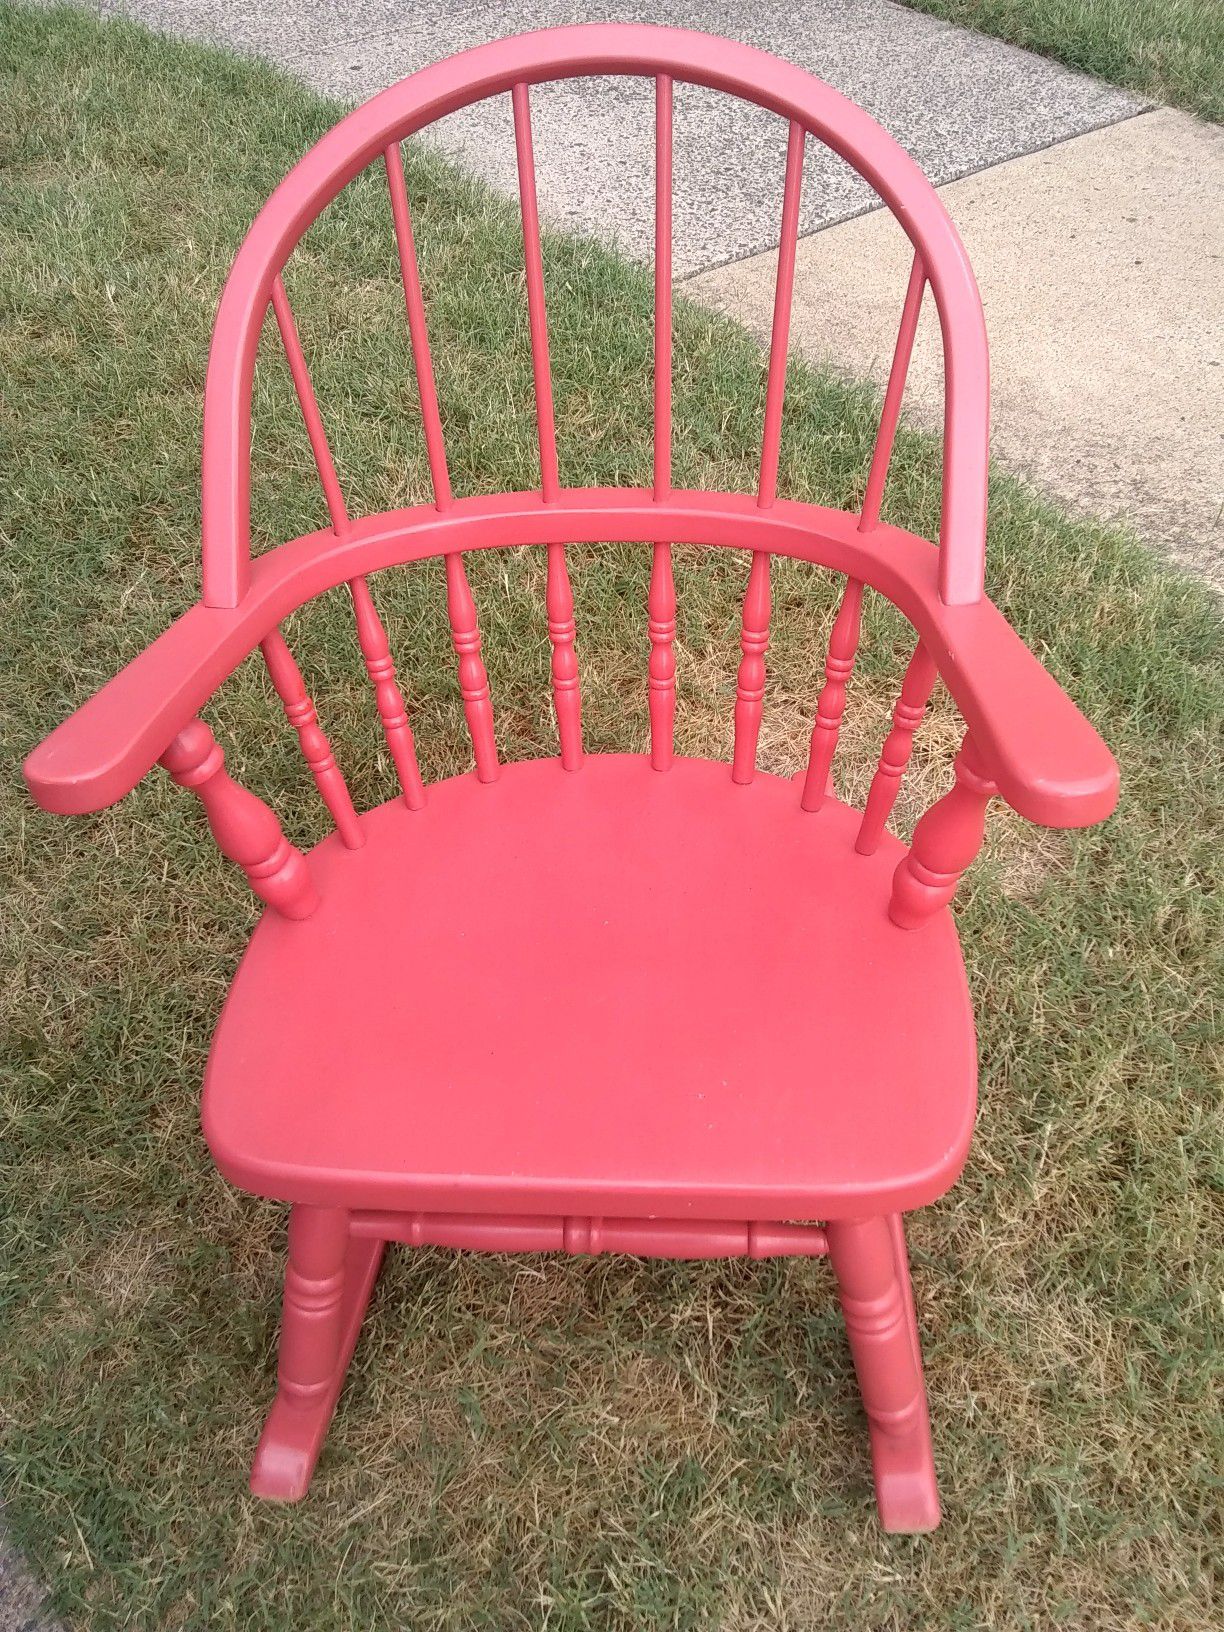 Painted racking chair excellent condition